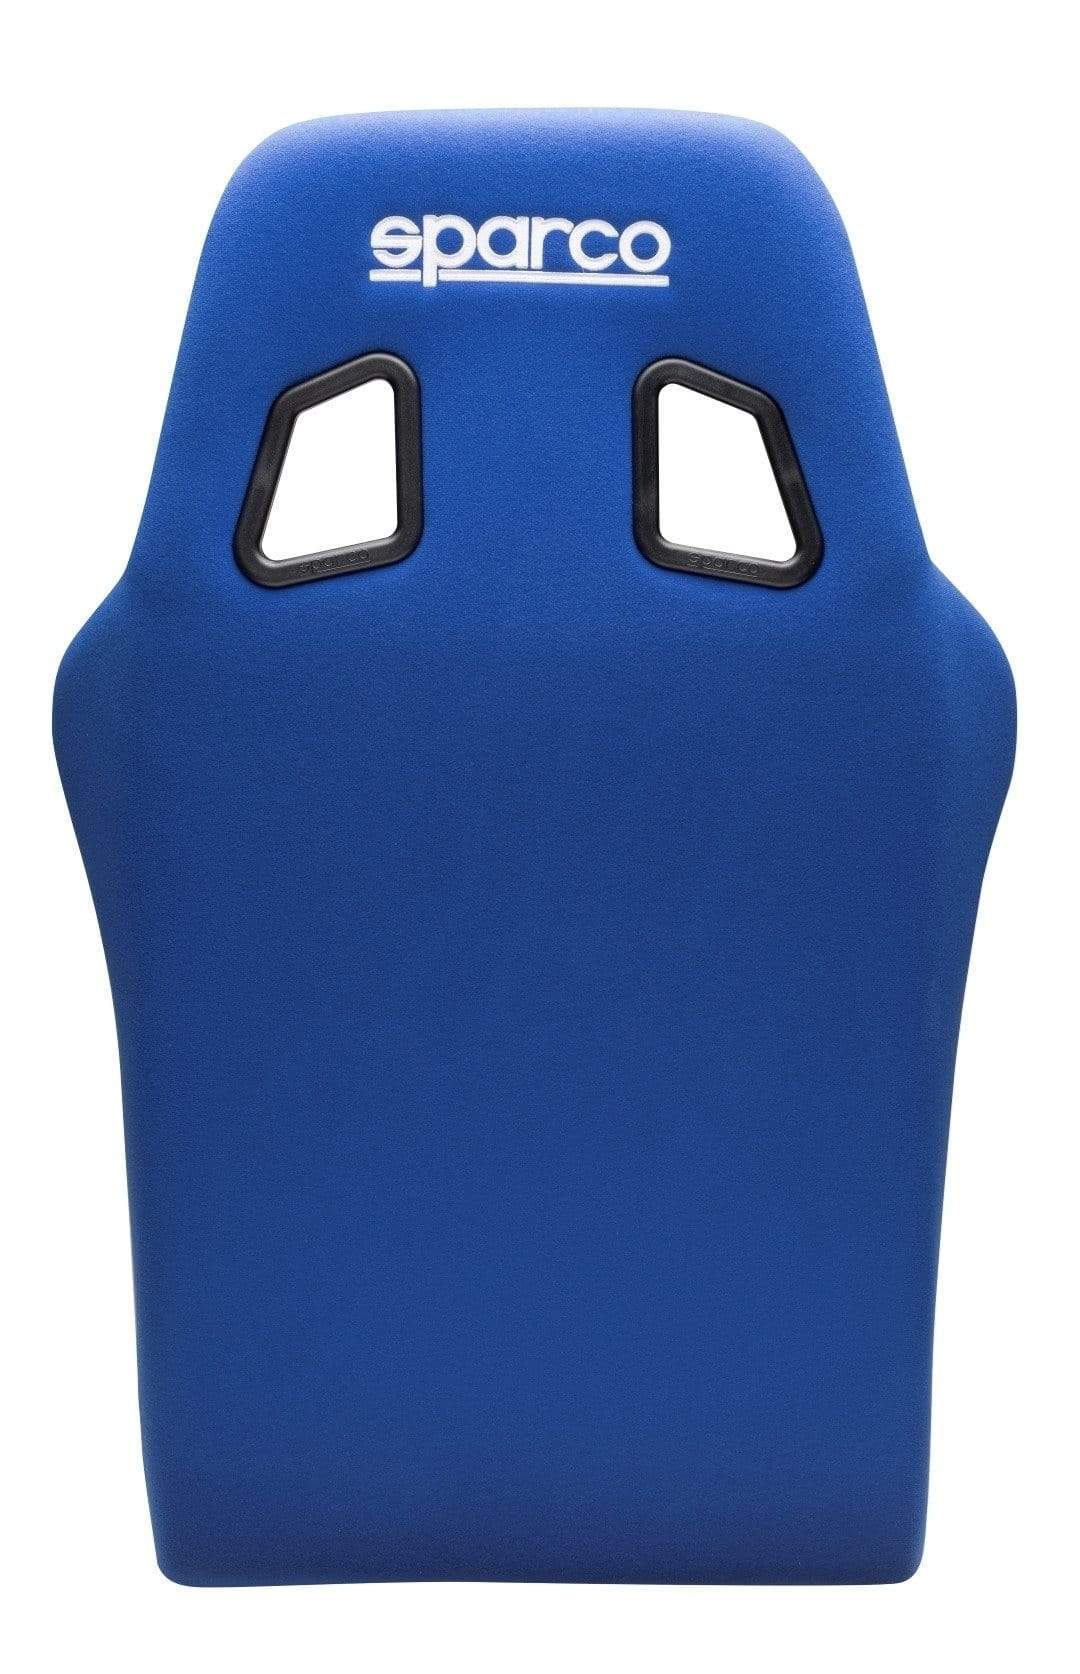 Sparco Sprint Seat (Large) Blue - Universal - Dirty Racing Products